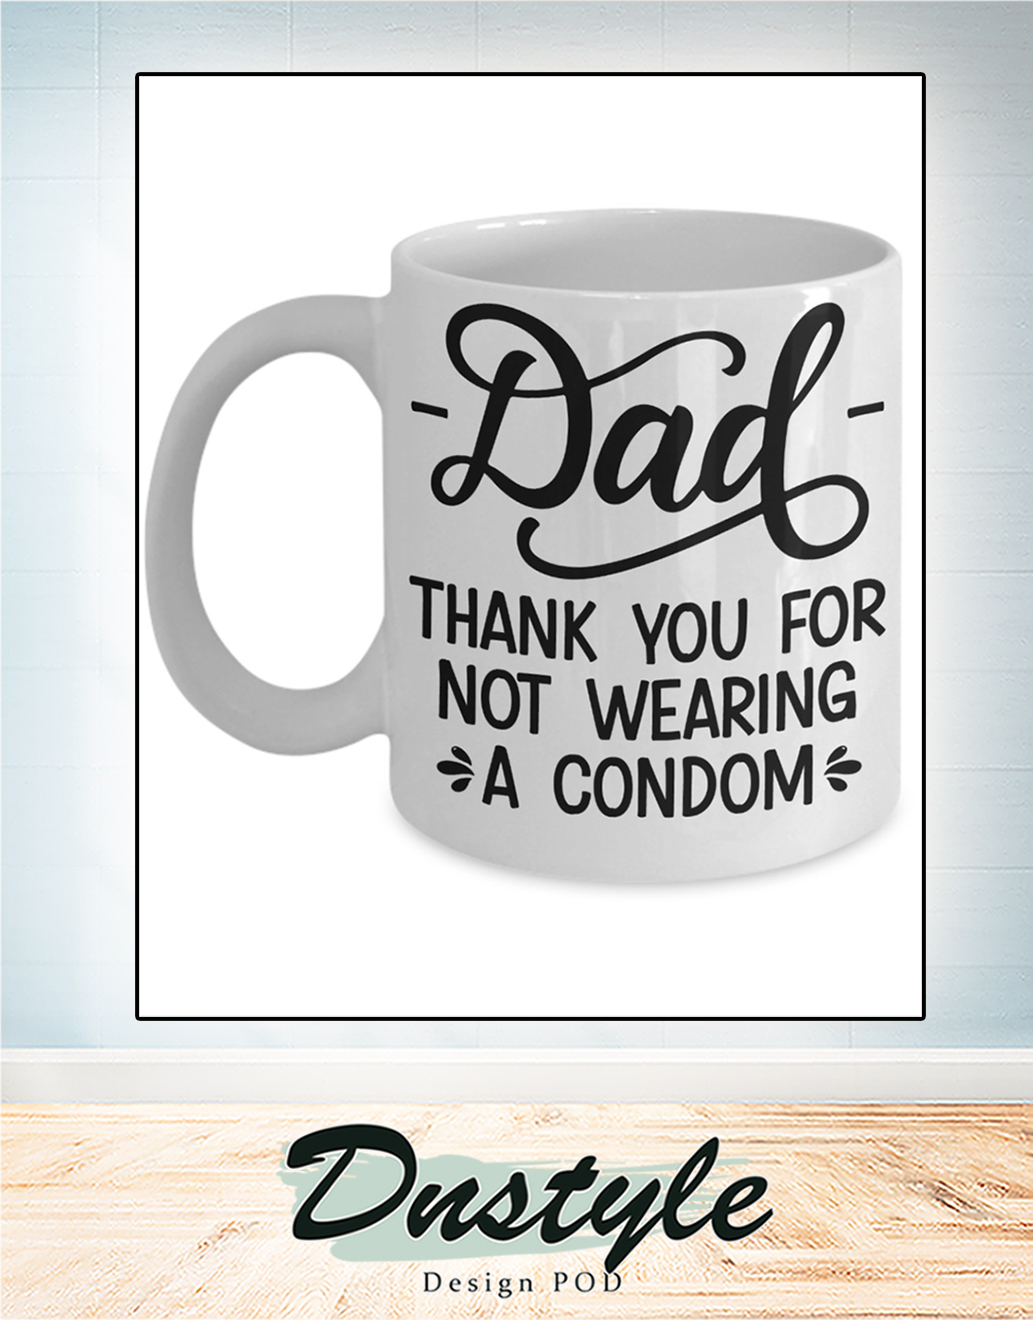 Dad thank you for not wearing a condom mug 1